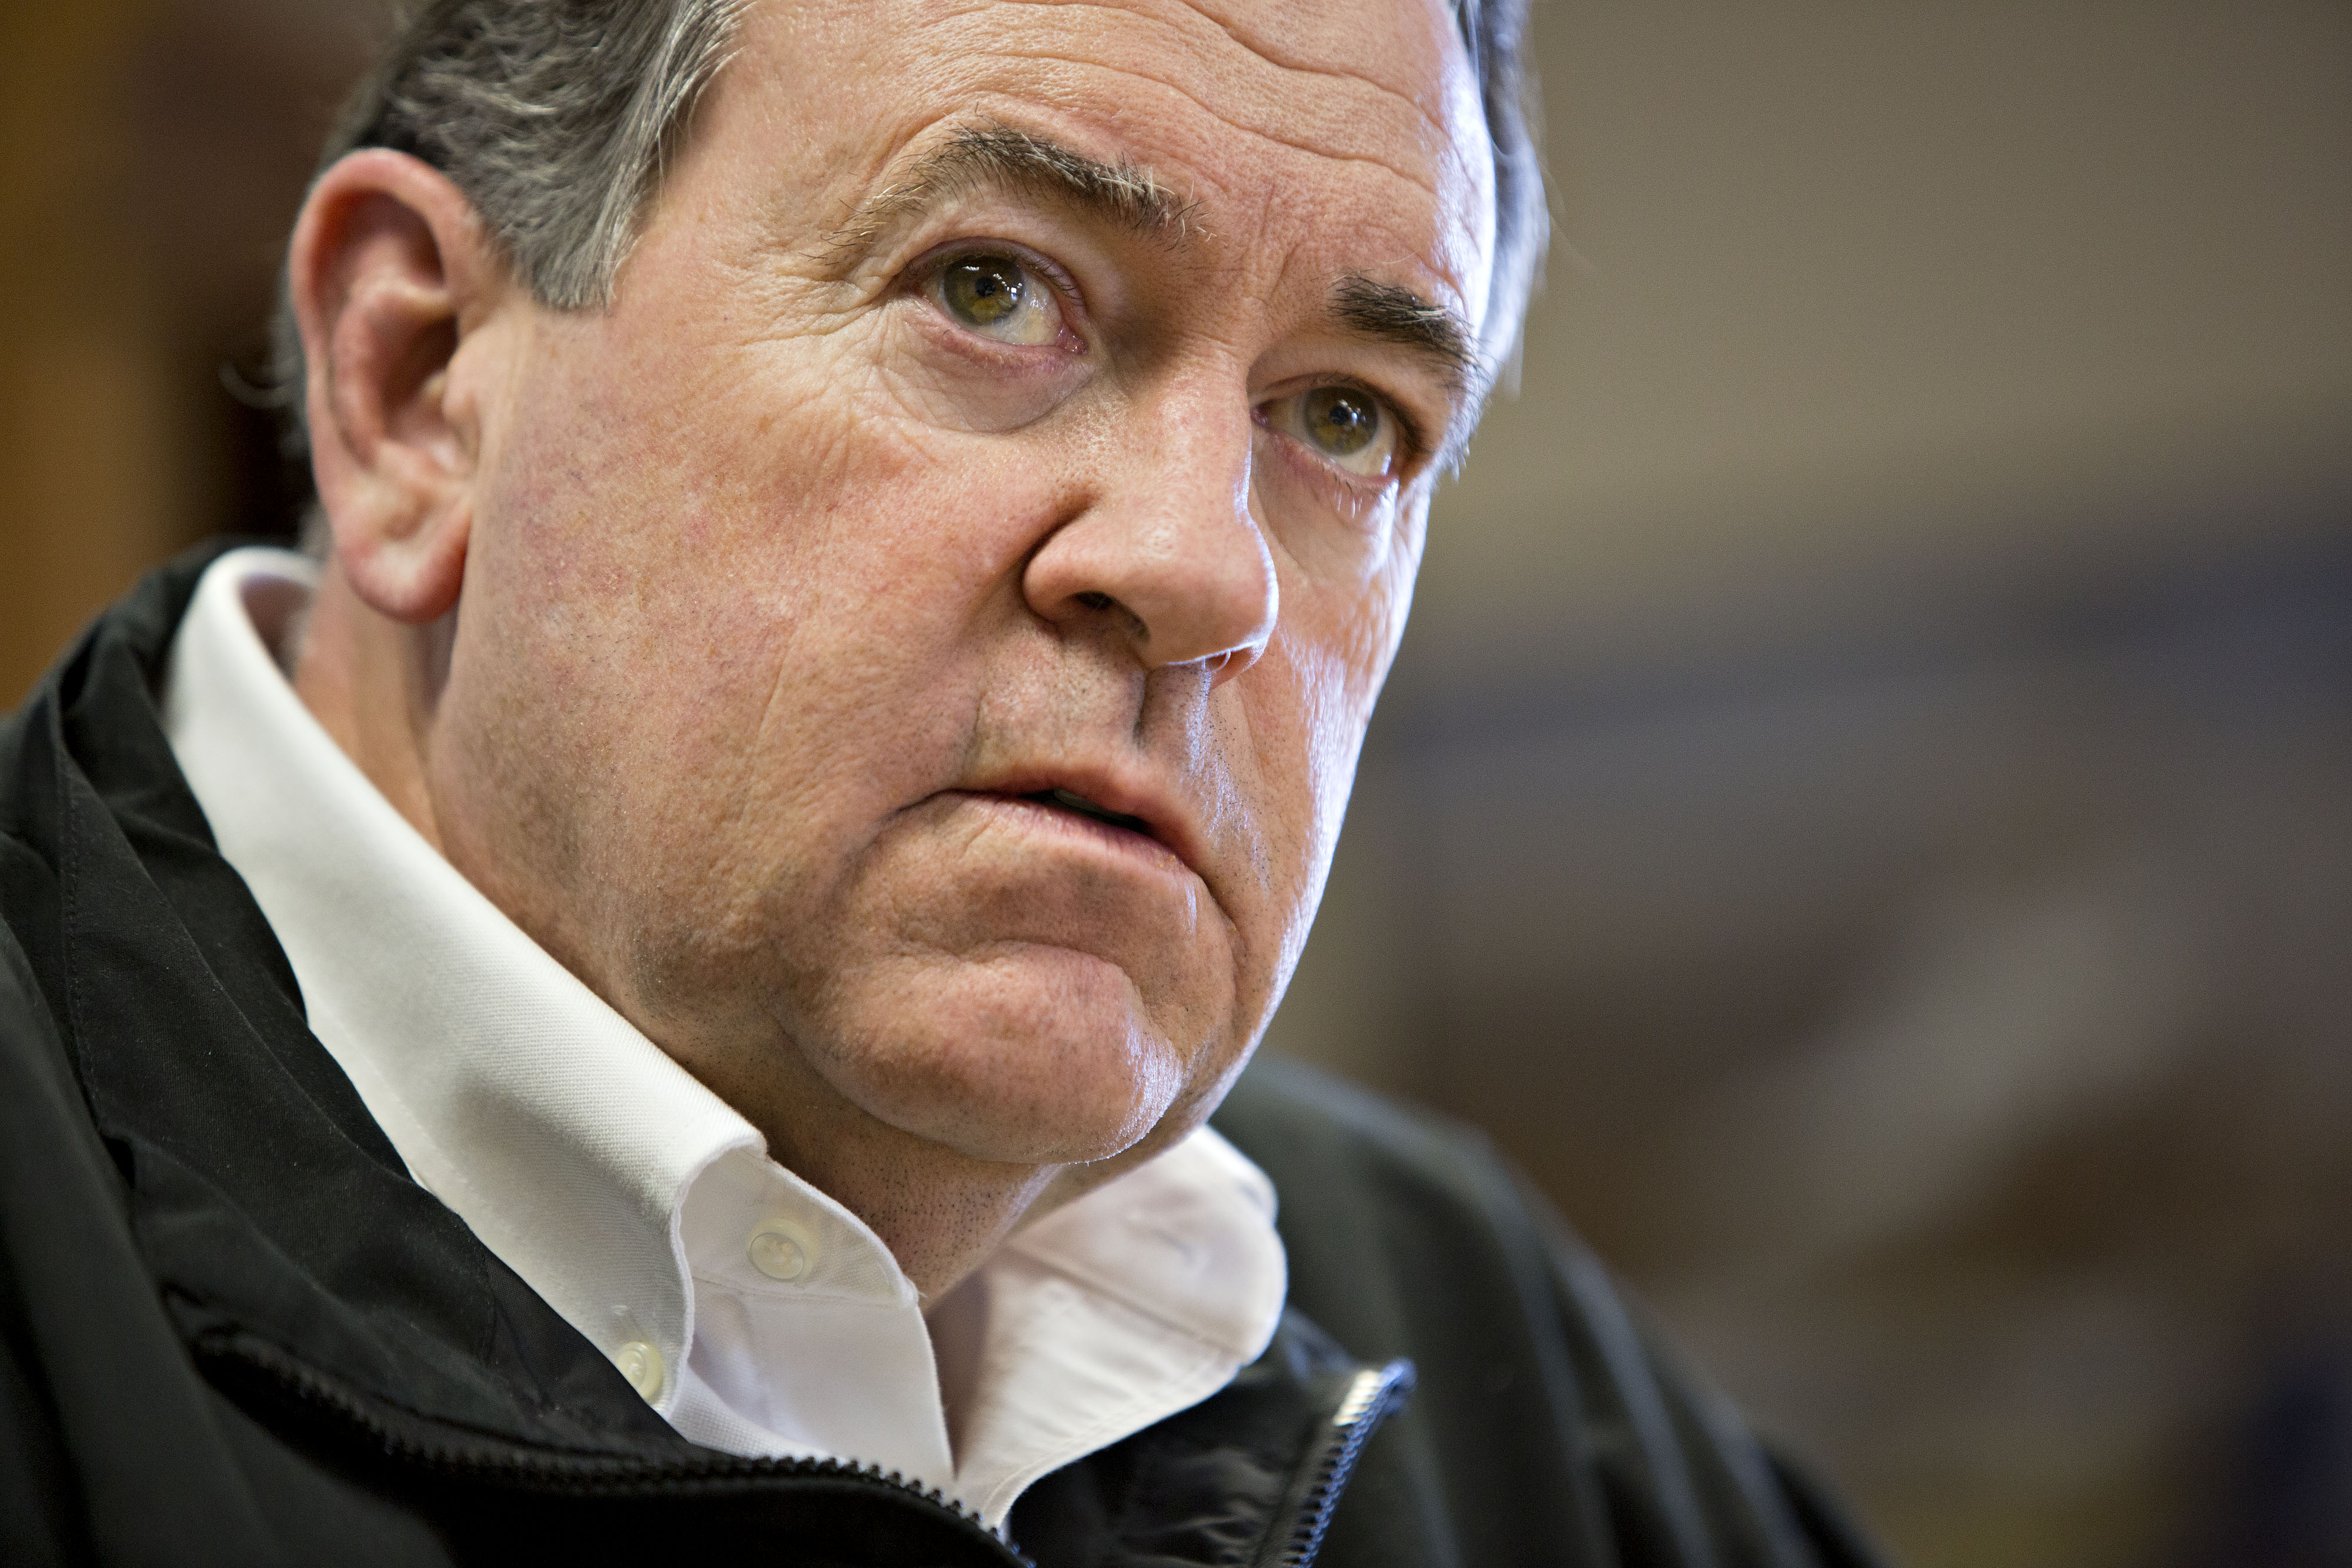 Mike Huckabee speaks during a campaign stop at Golden Grain Energy in Mason City, IA on Jan. 5, 2016. (Daniel Acker—Bloomberg/Getty Images)